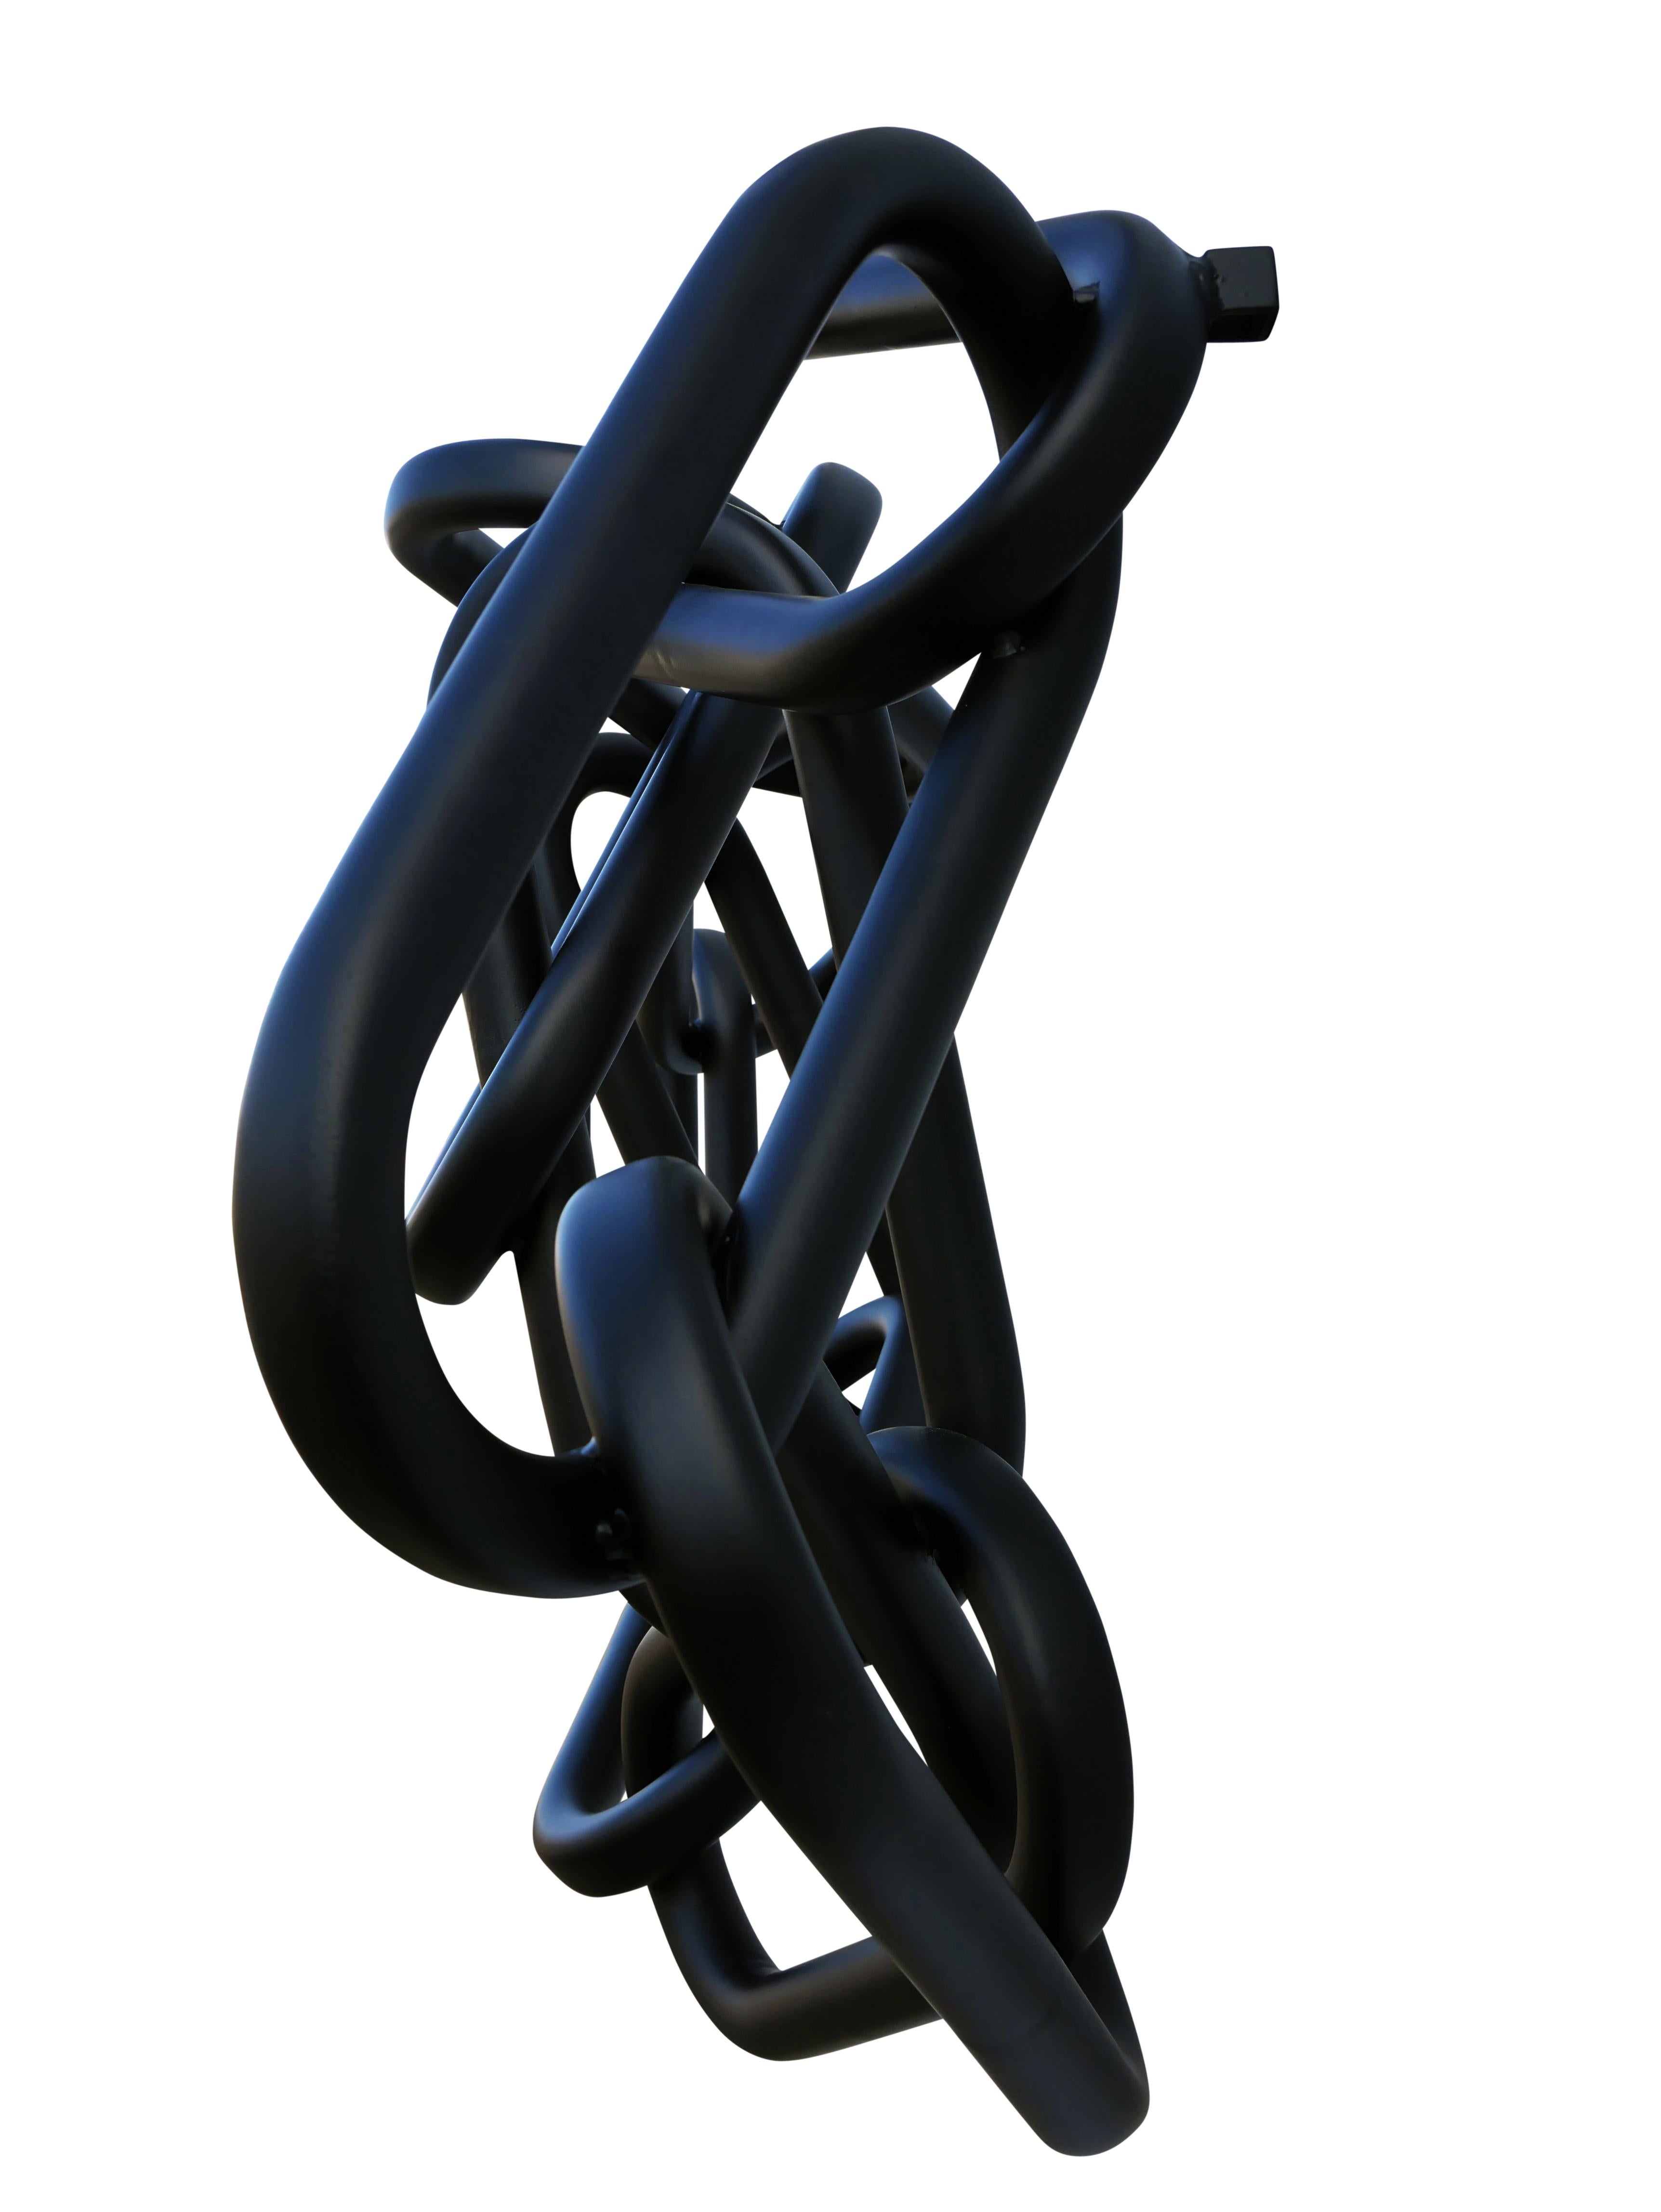 Large Abstract Contemporary Black Chain Wall Sculpture For Sale 2